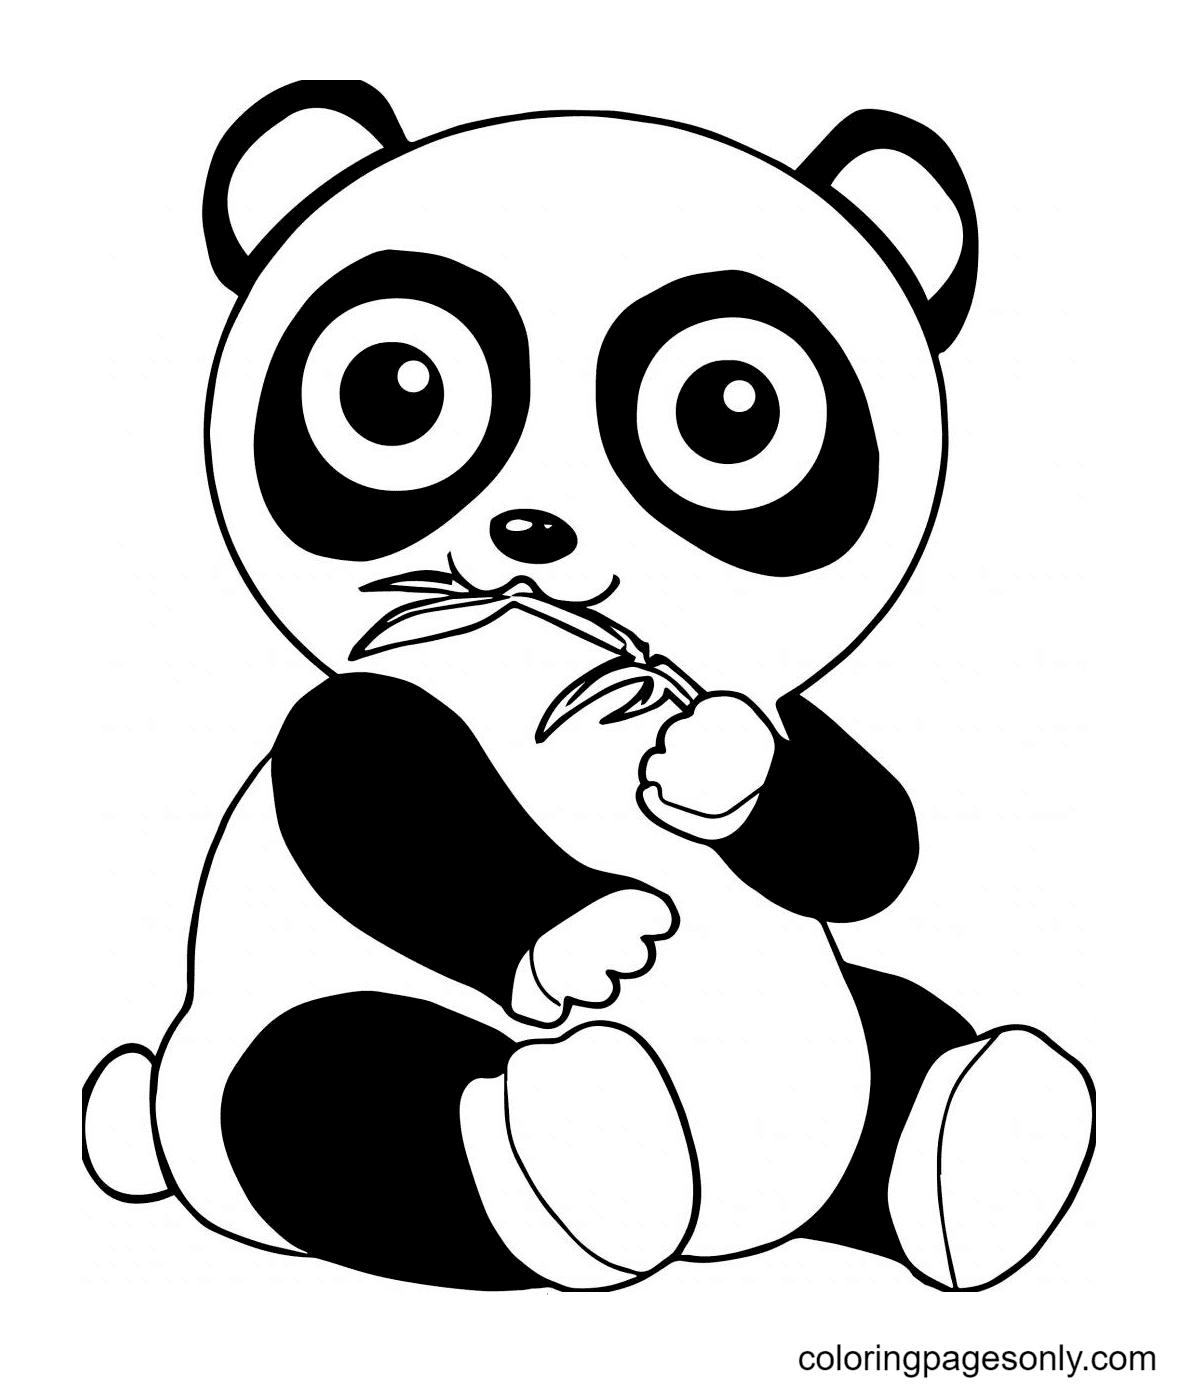 Cute Panda Coloring Pages   Panda Coloring Pages   Coloring Pages ...